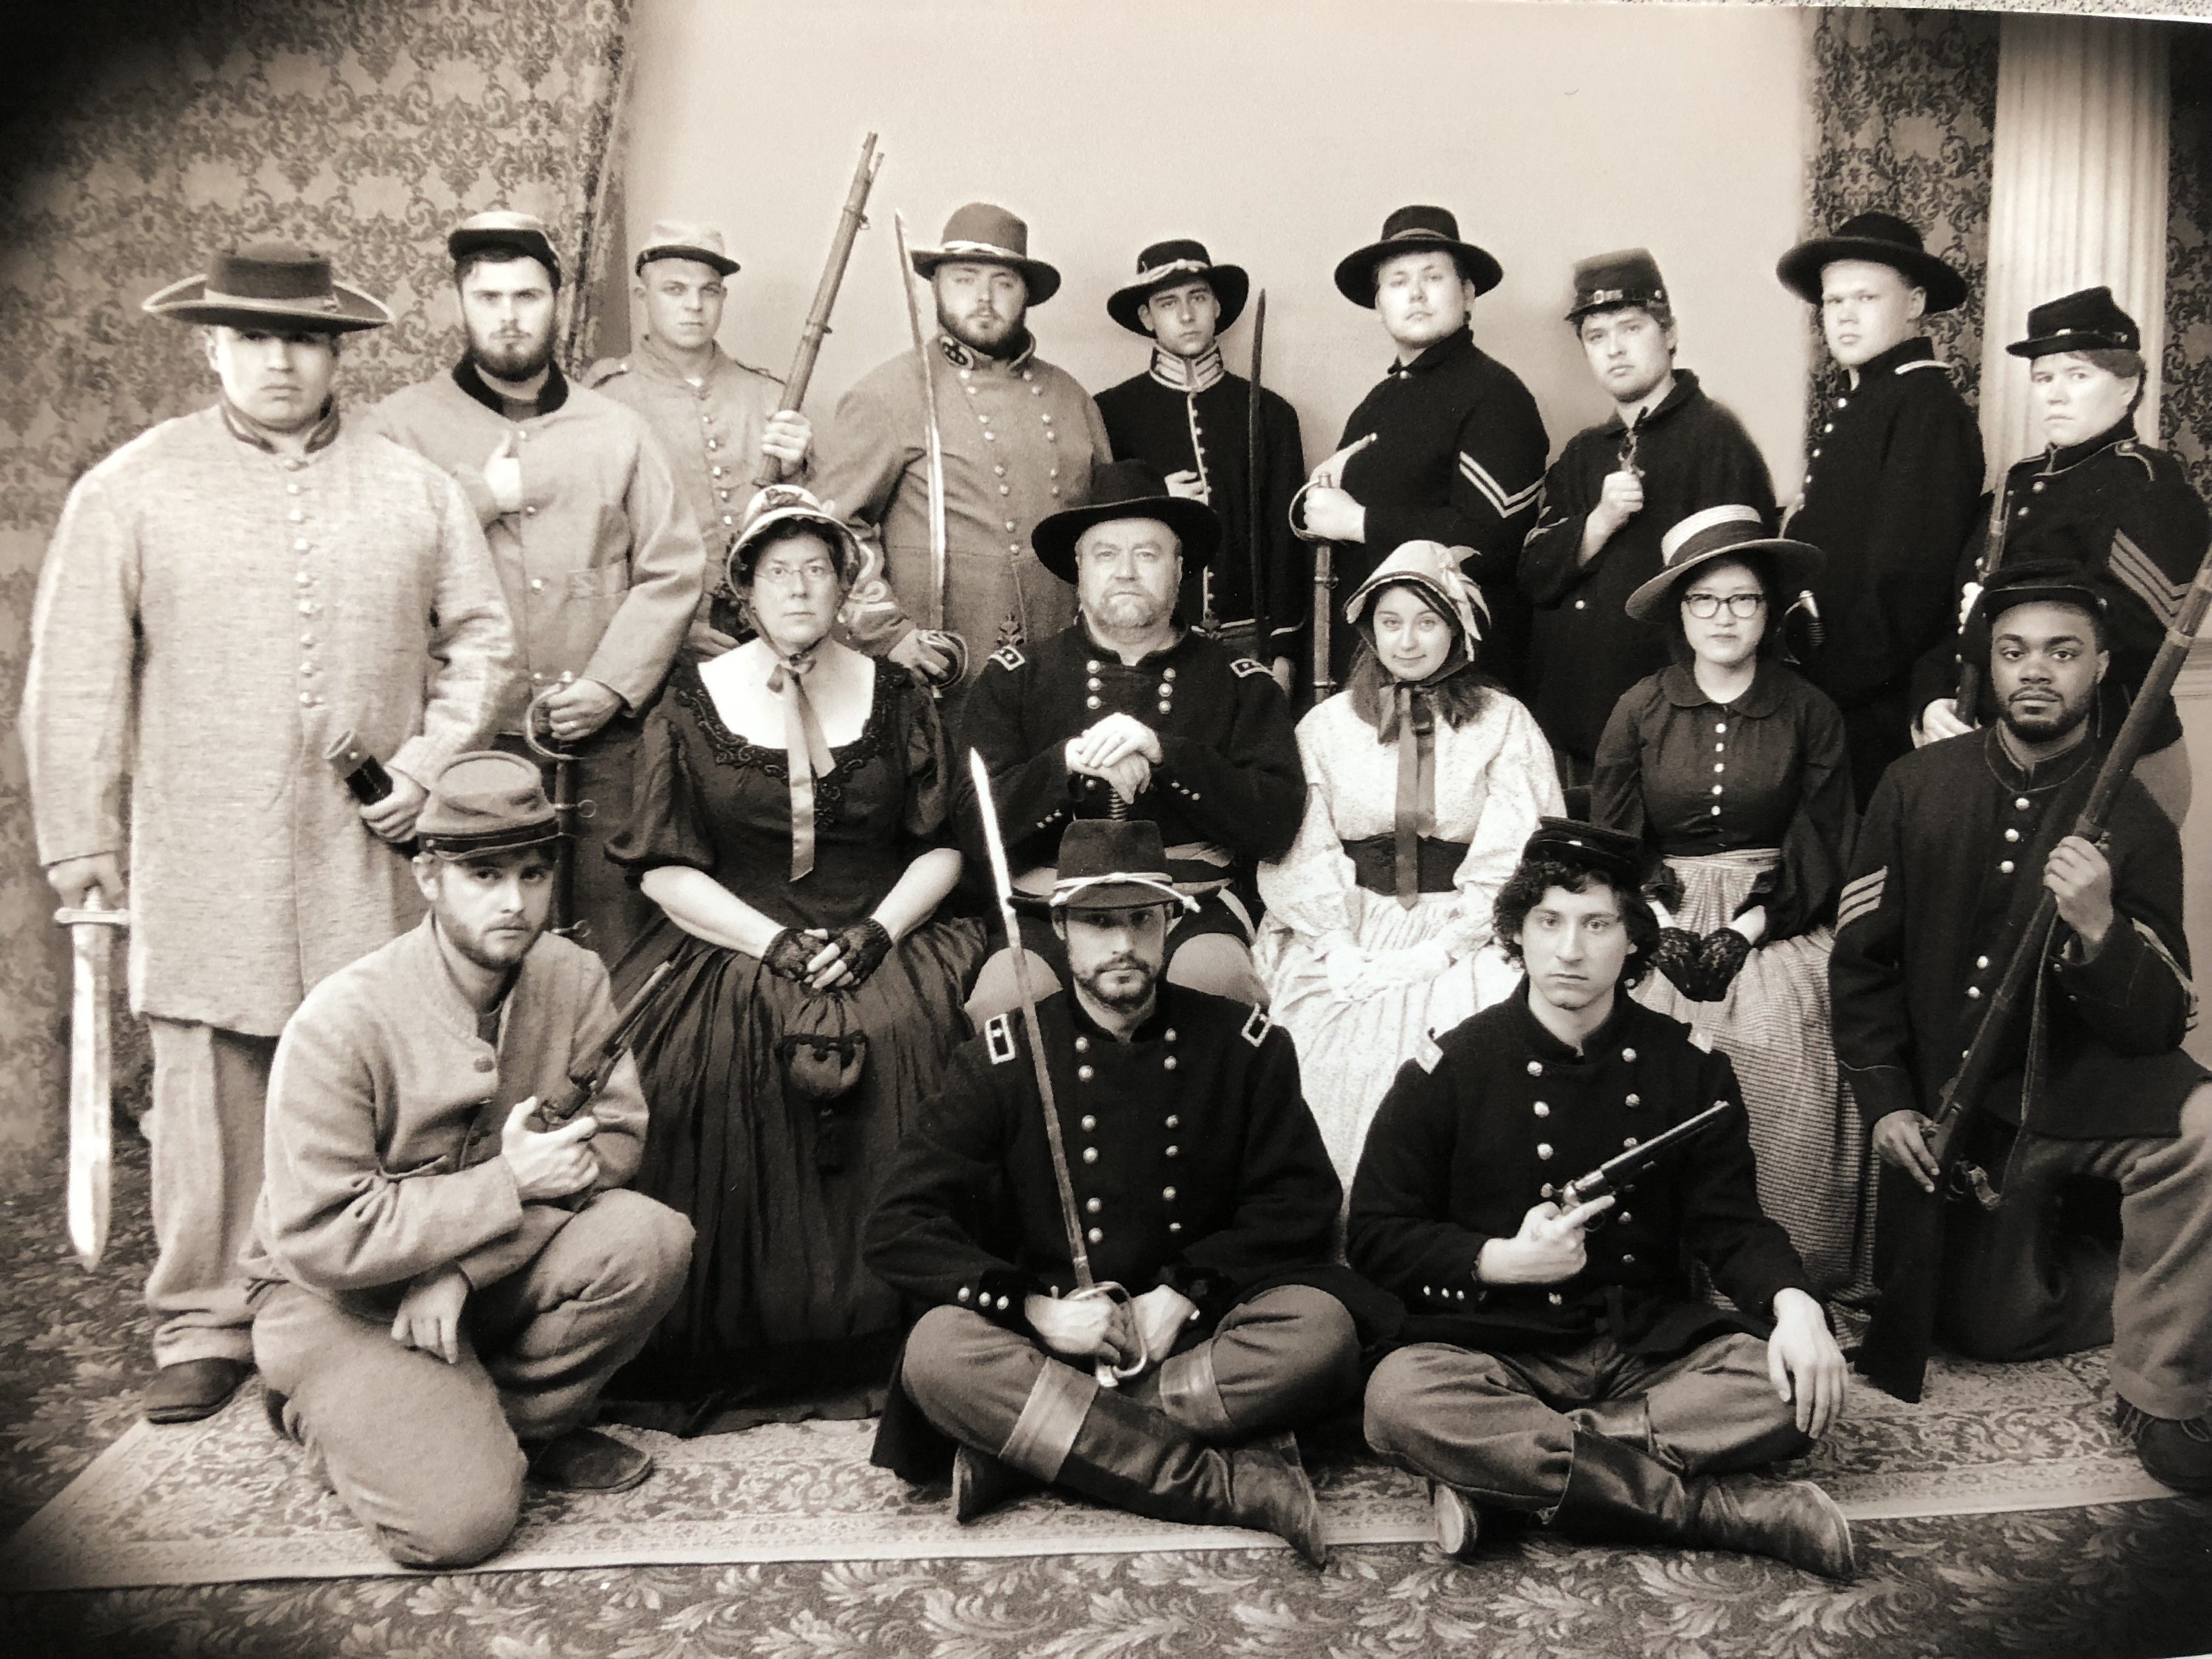 A group of students pose as Civil War era soliders.